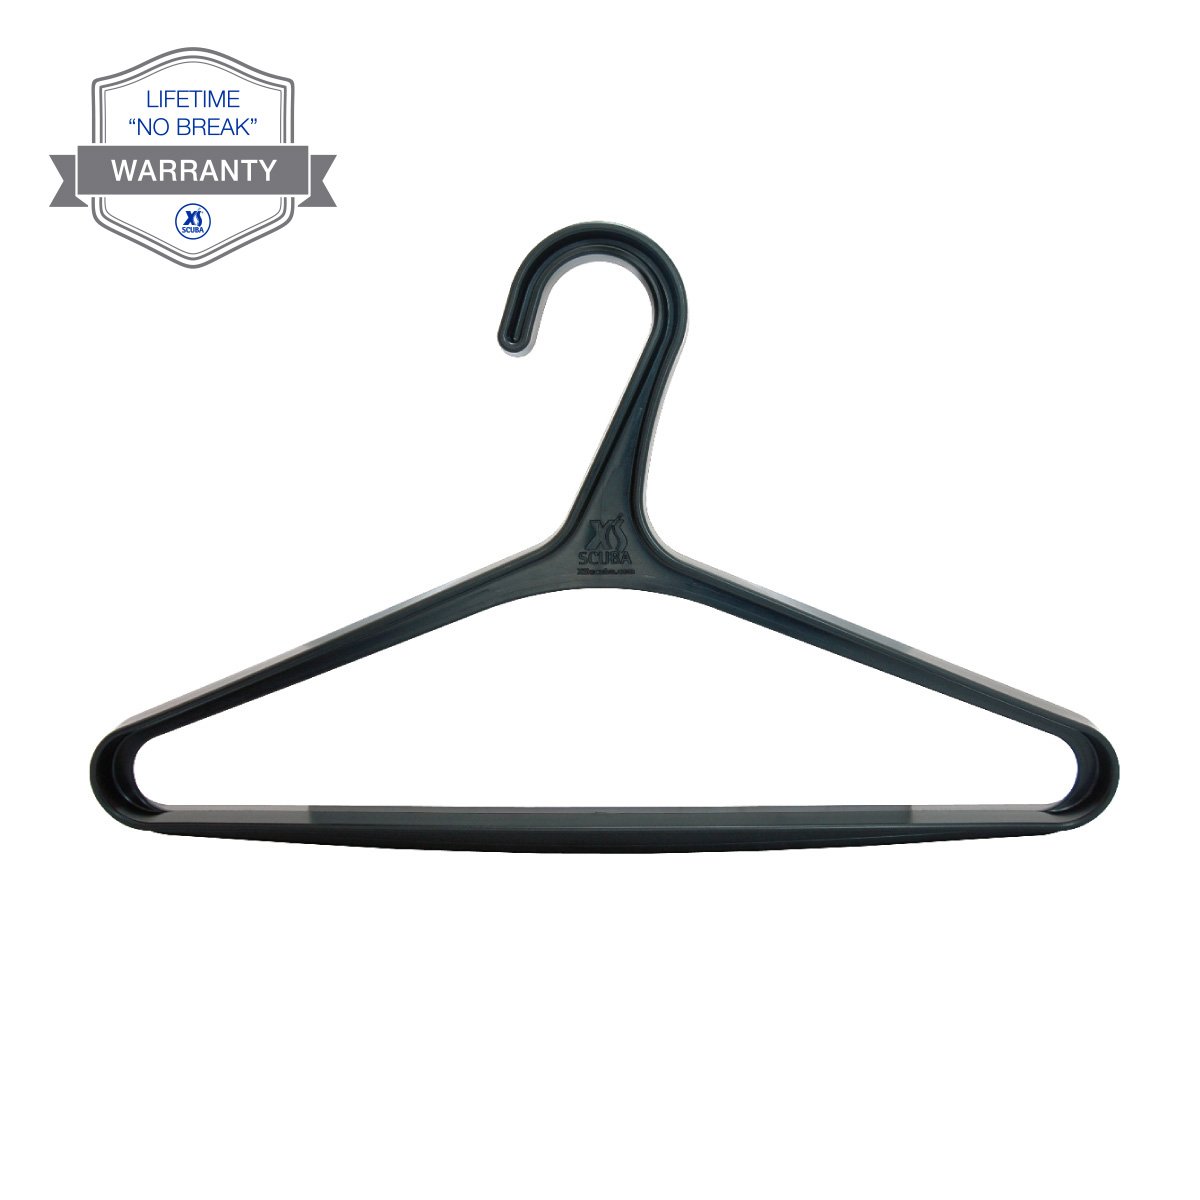 XS Scuba Basic Wetsuit Hanger — XS Scuba - Everything For The Perfect Dive